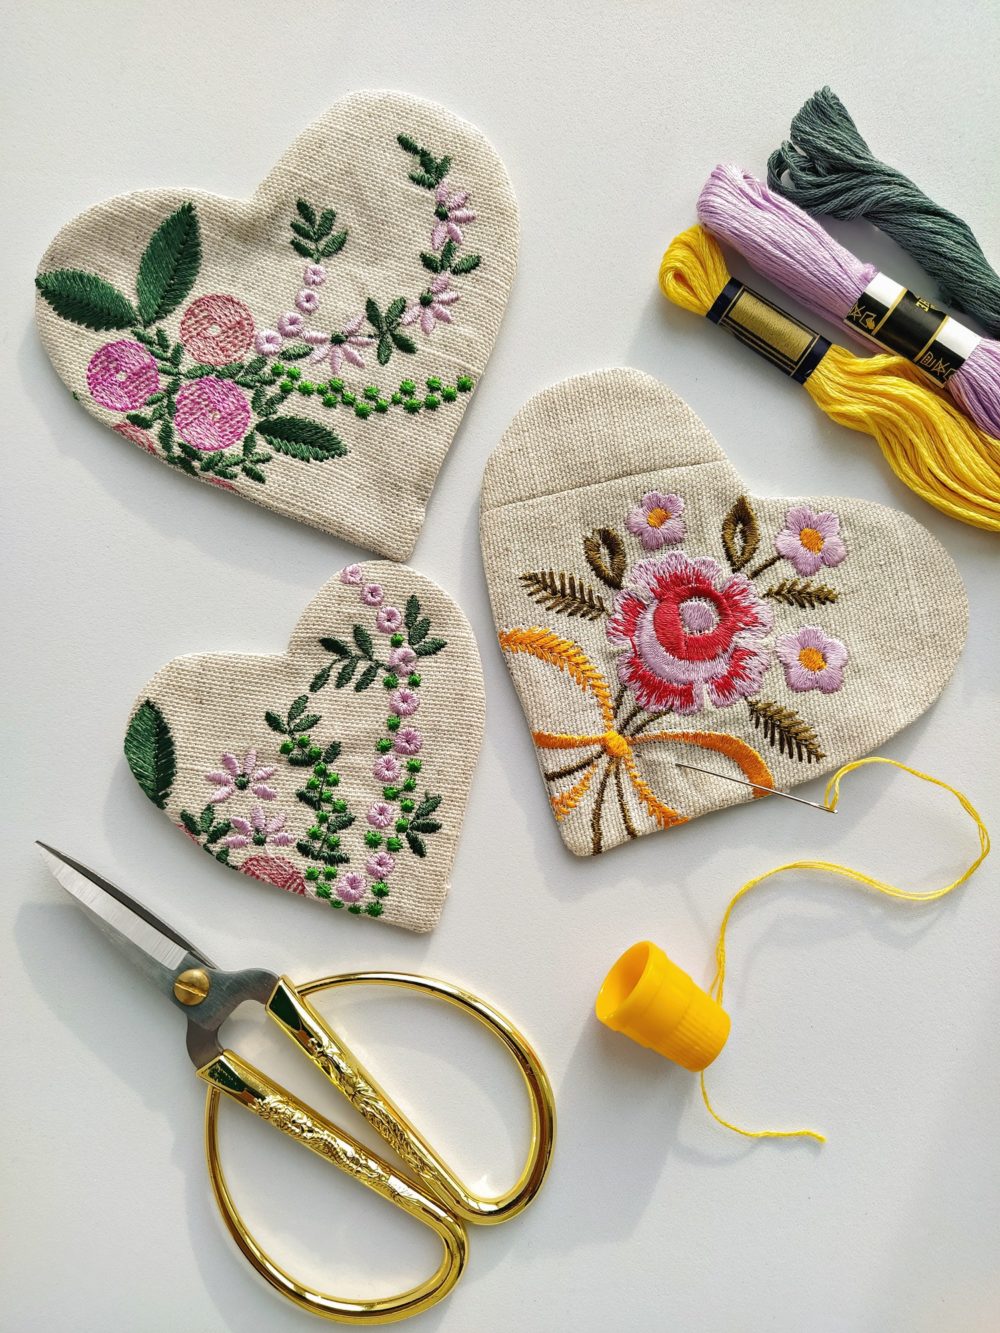 Fabric linen hearts with floral embroidery and vintage scissors, needle, thread on white